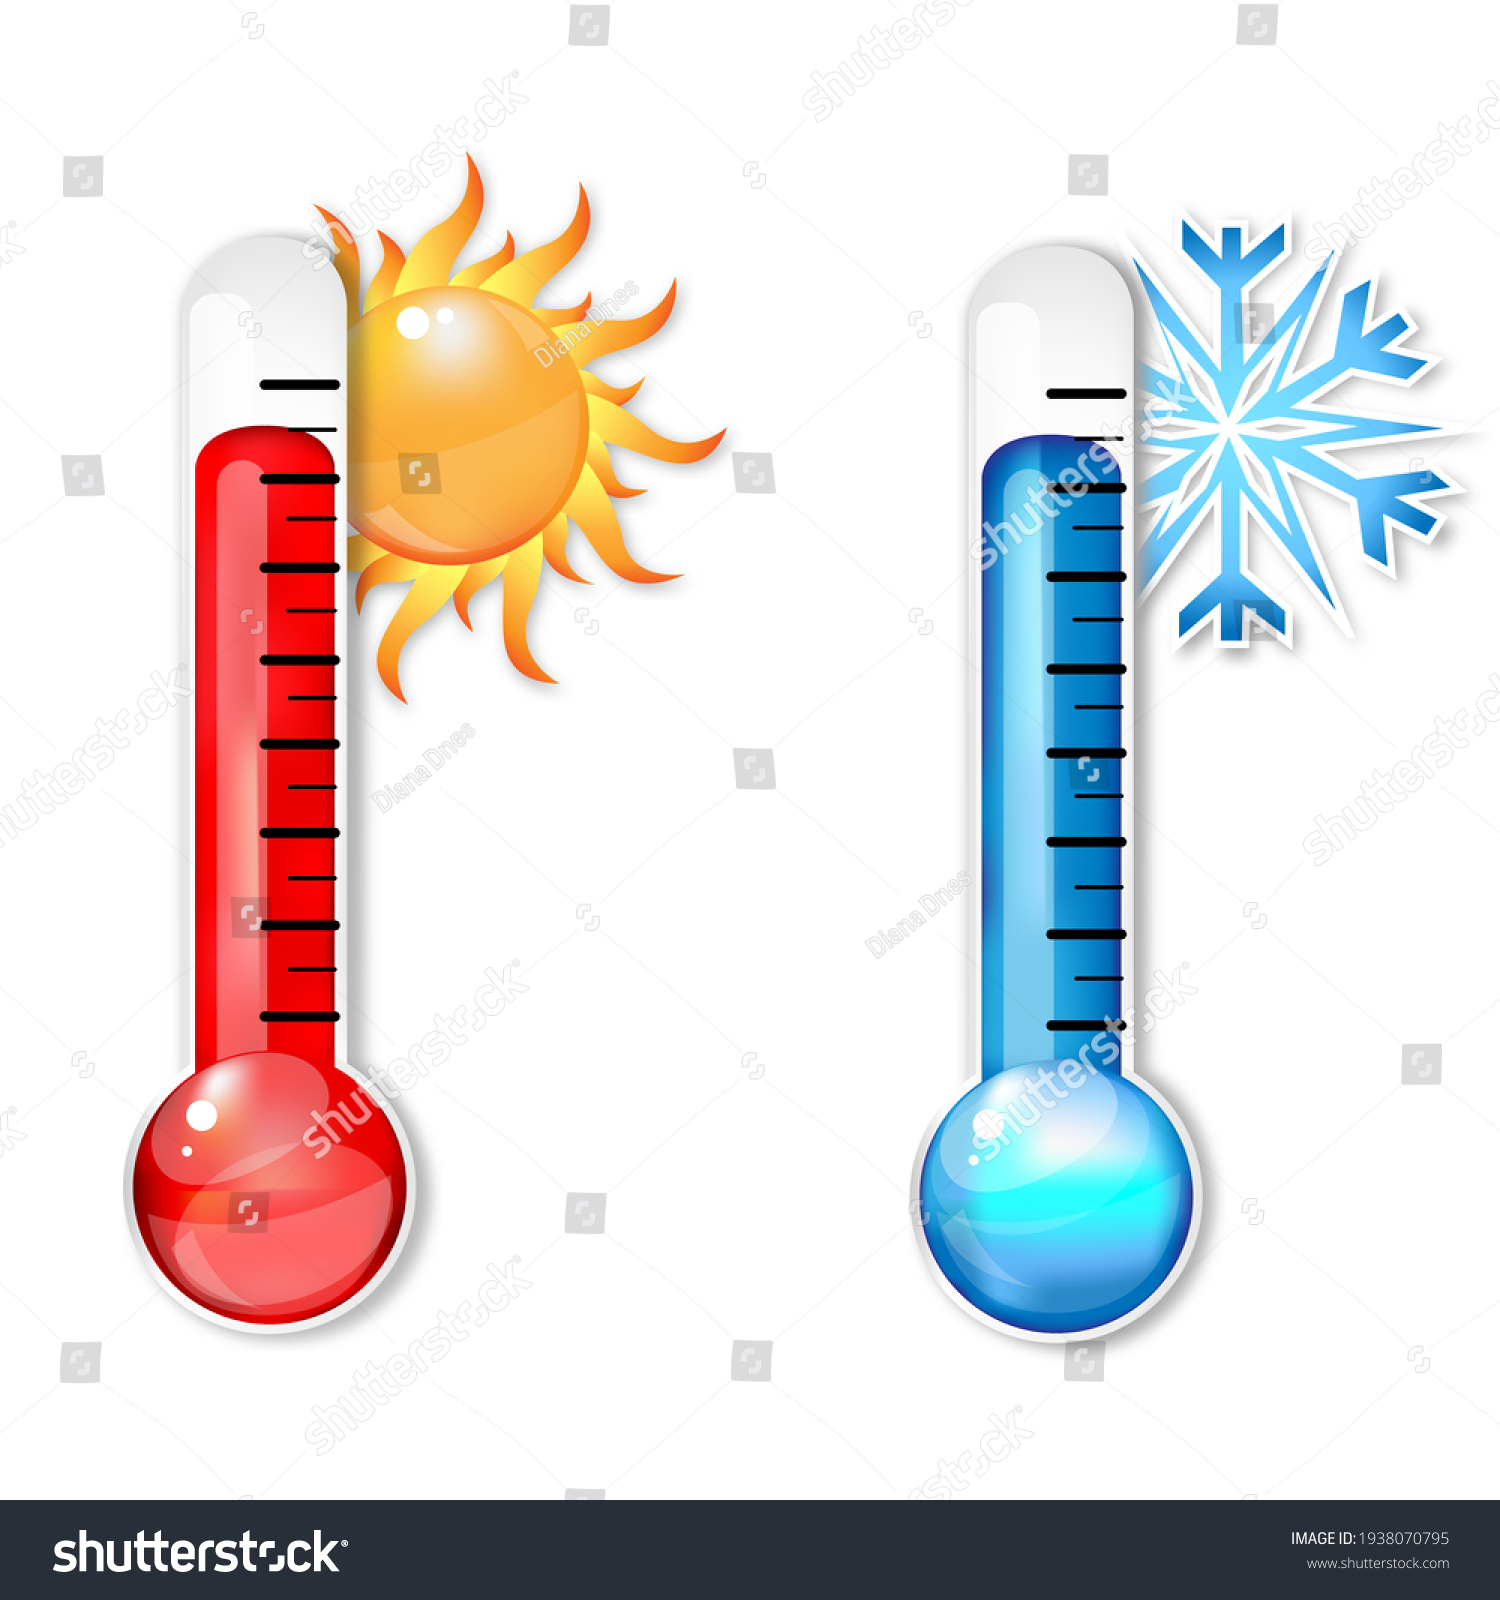 316,701 Hot climate Images, Stock Photos & Vectors | Shutterstock